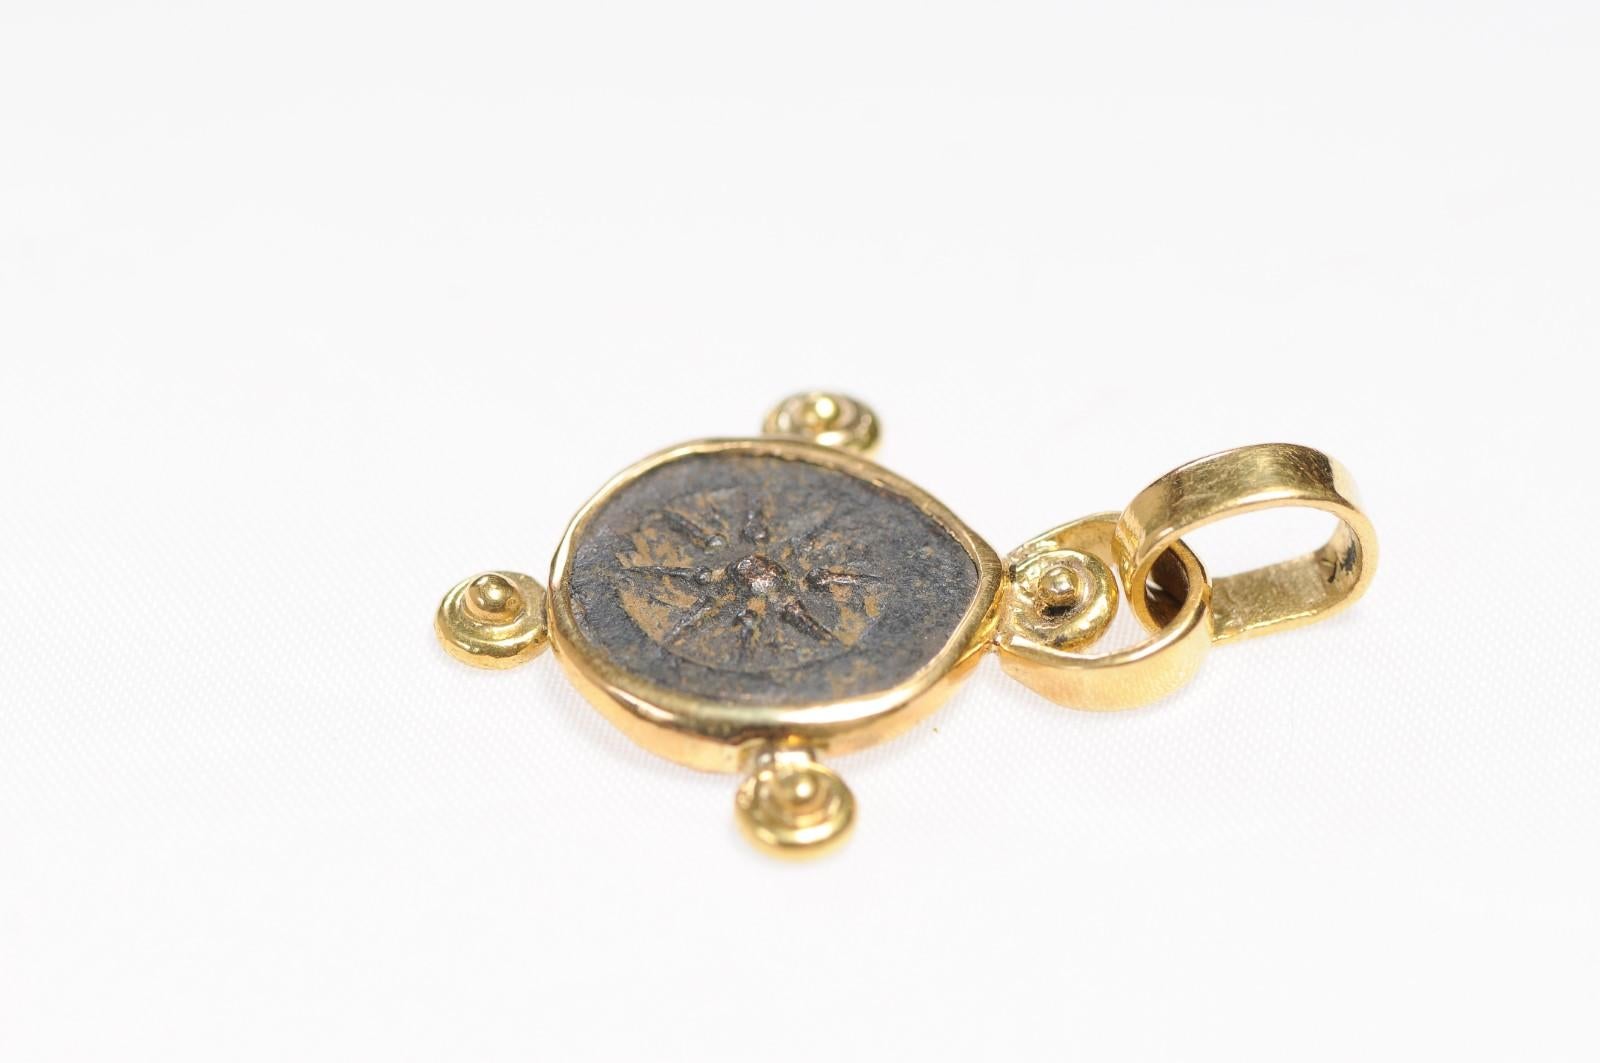 Roman Widow's Mite Coin, 22kt Gold Pendant (pendant only) For Sale 4